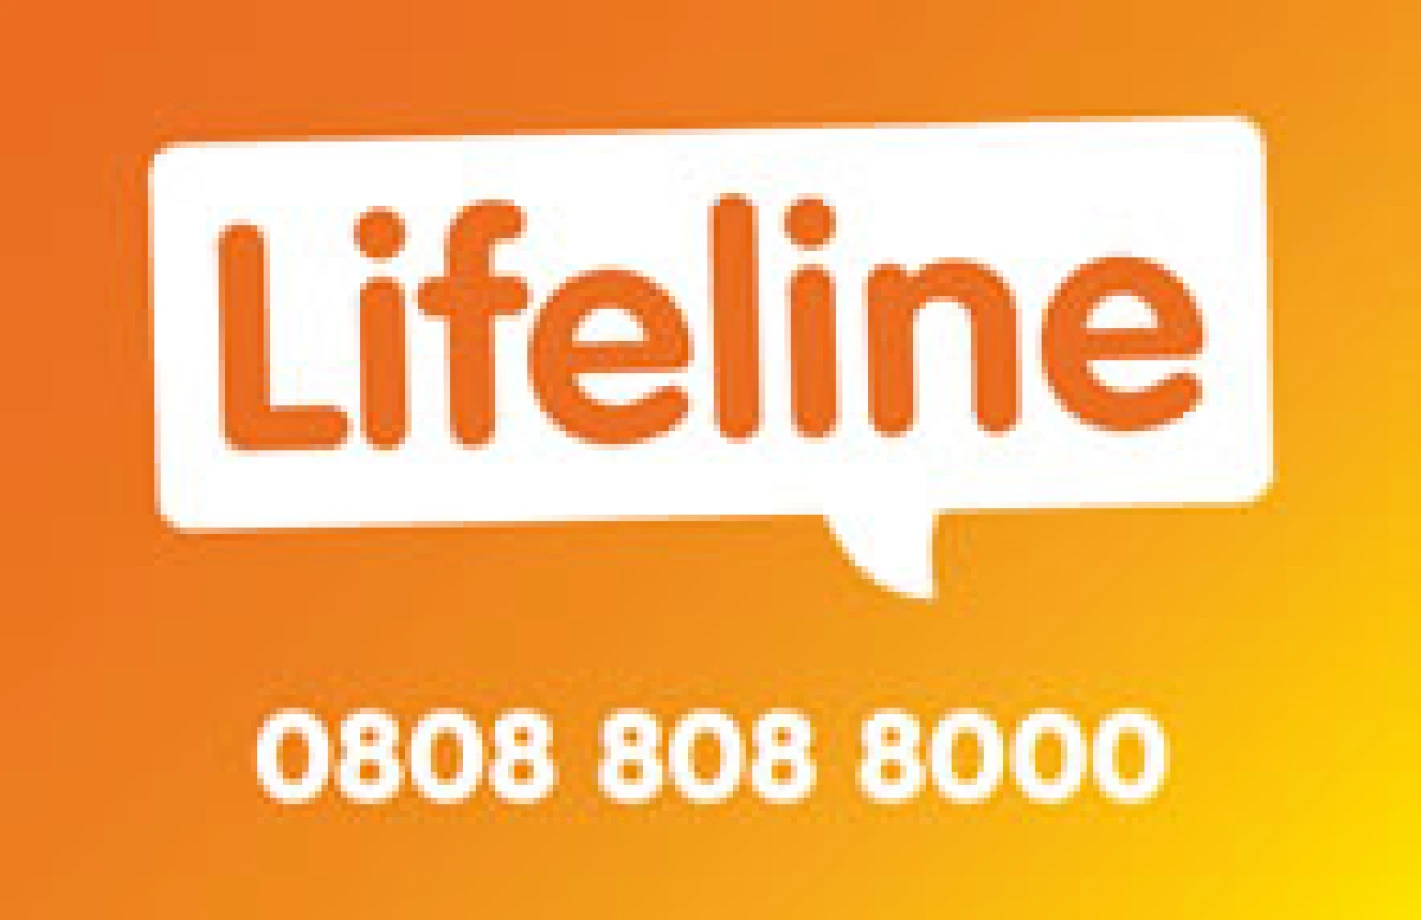 Lifeline is there to help over the holidays